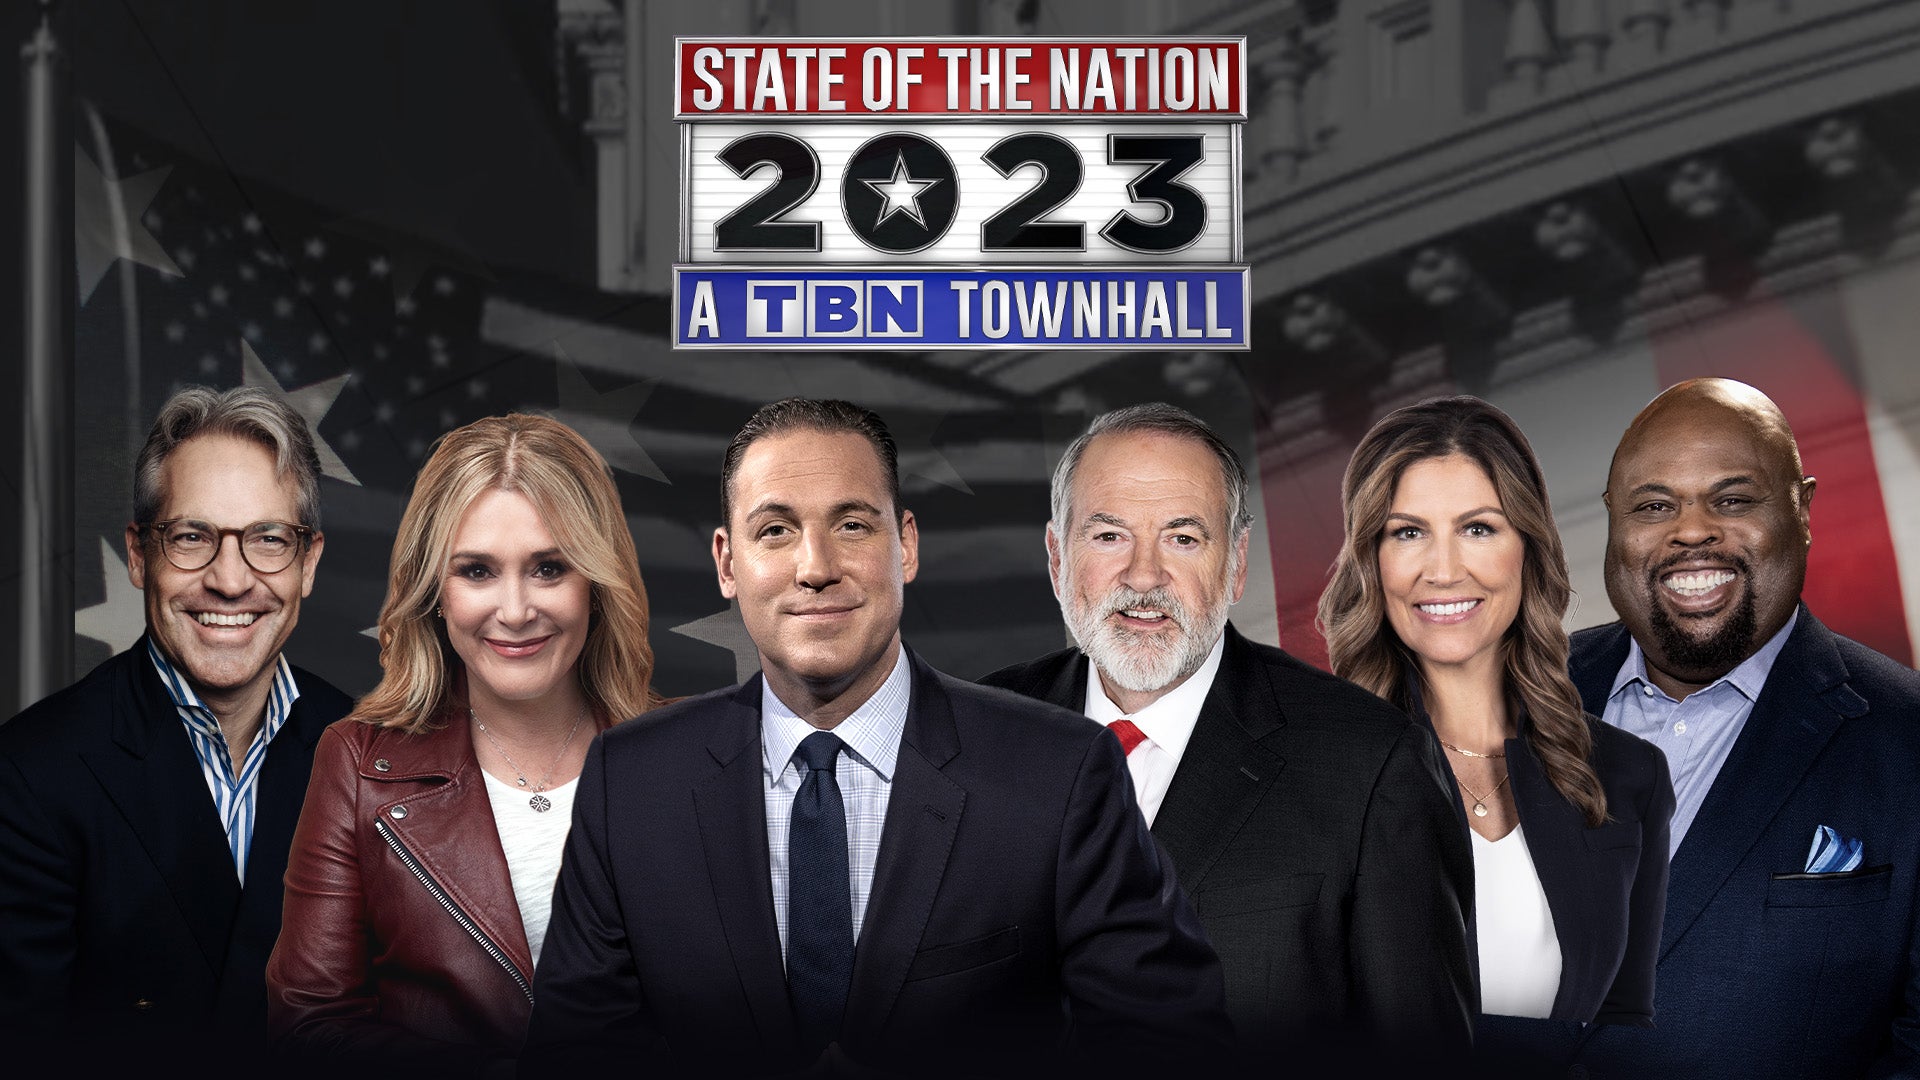 State of the Nation: A TBN Townhall